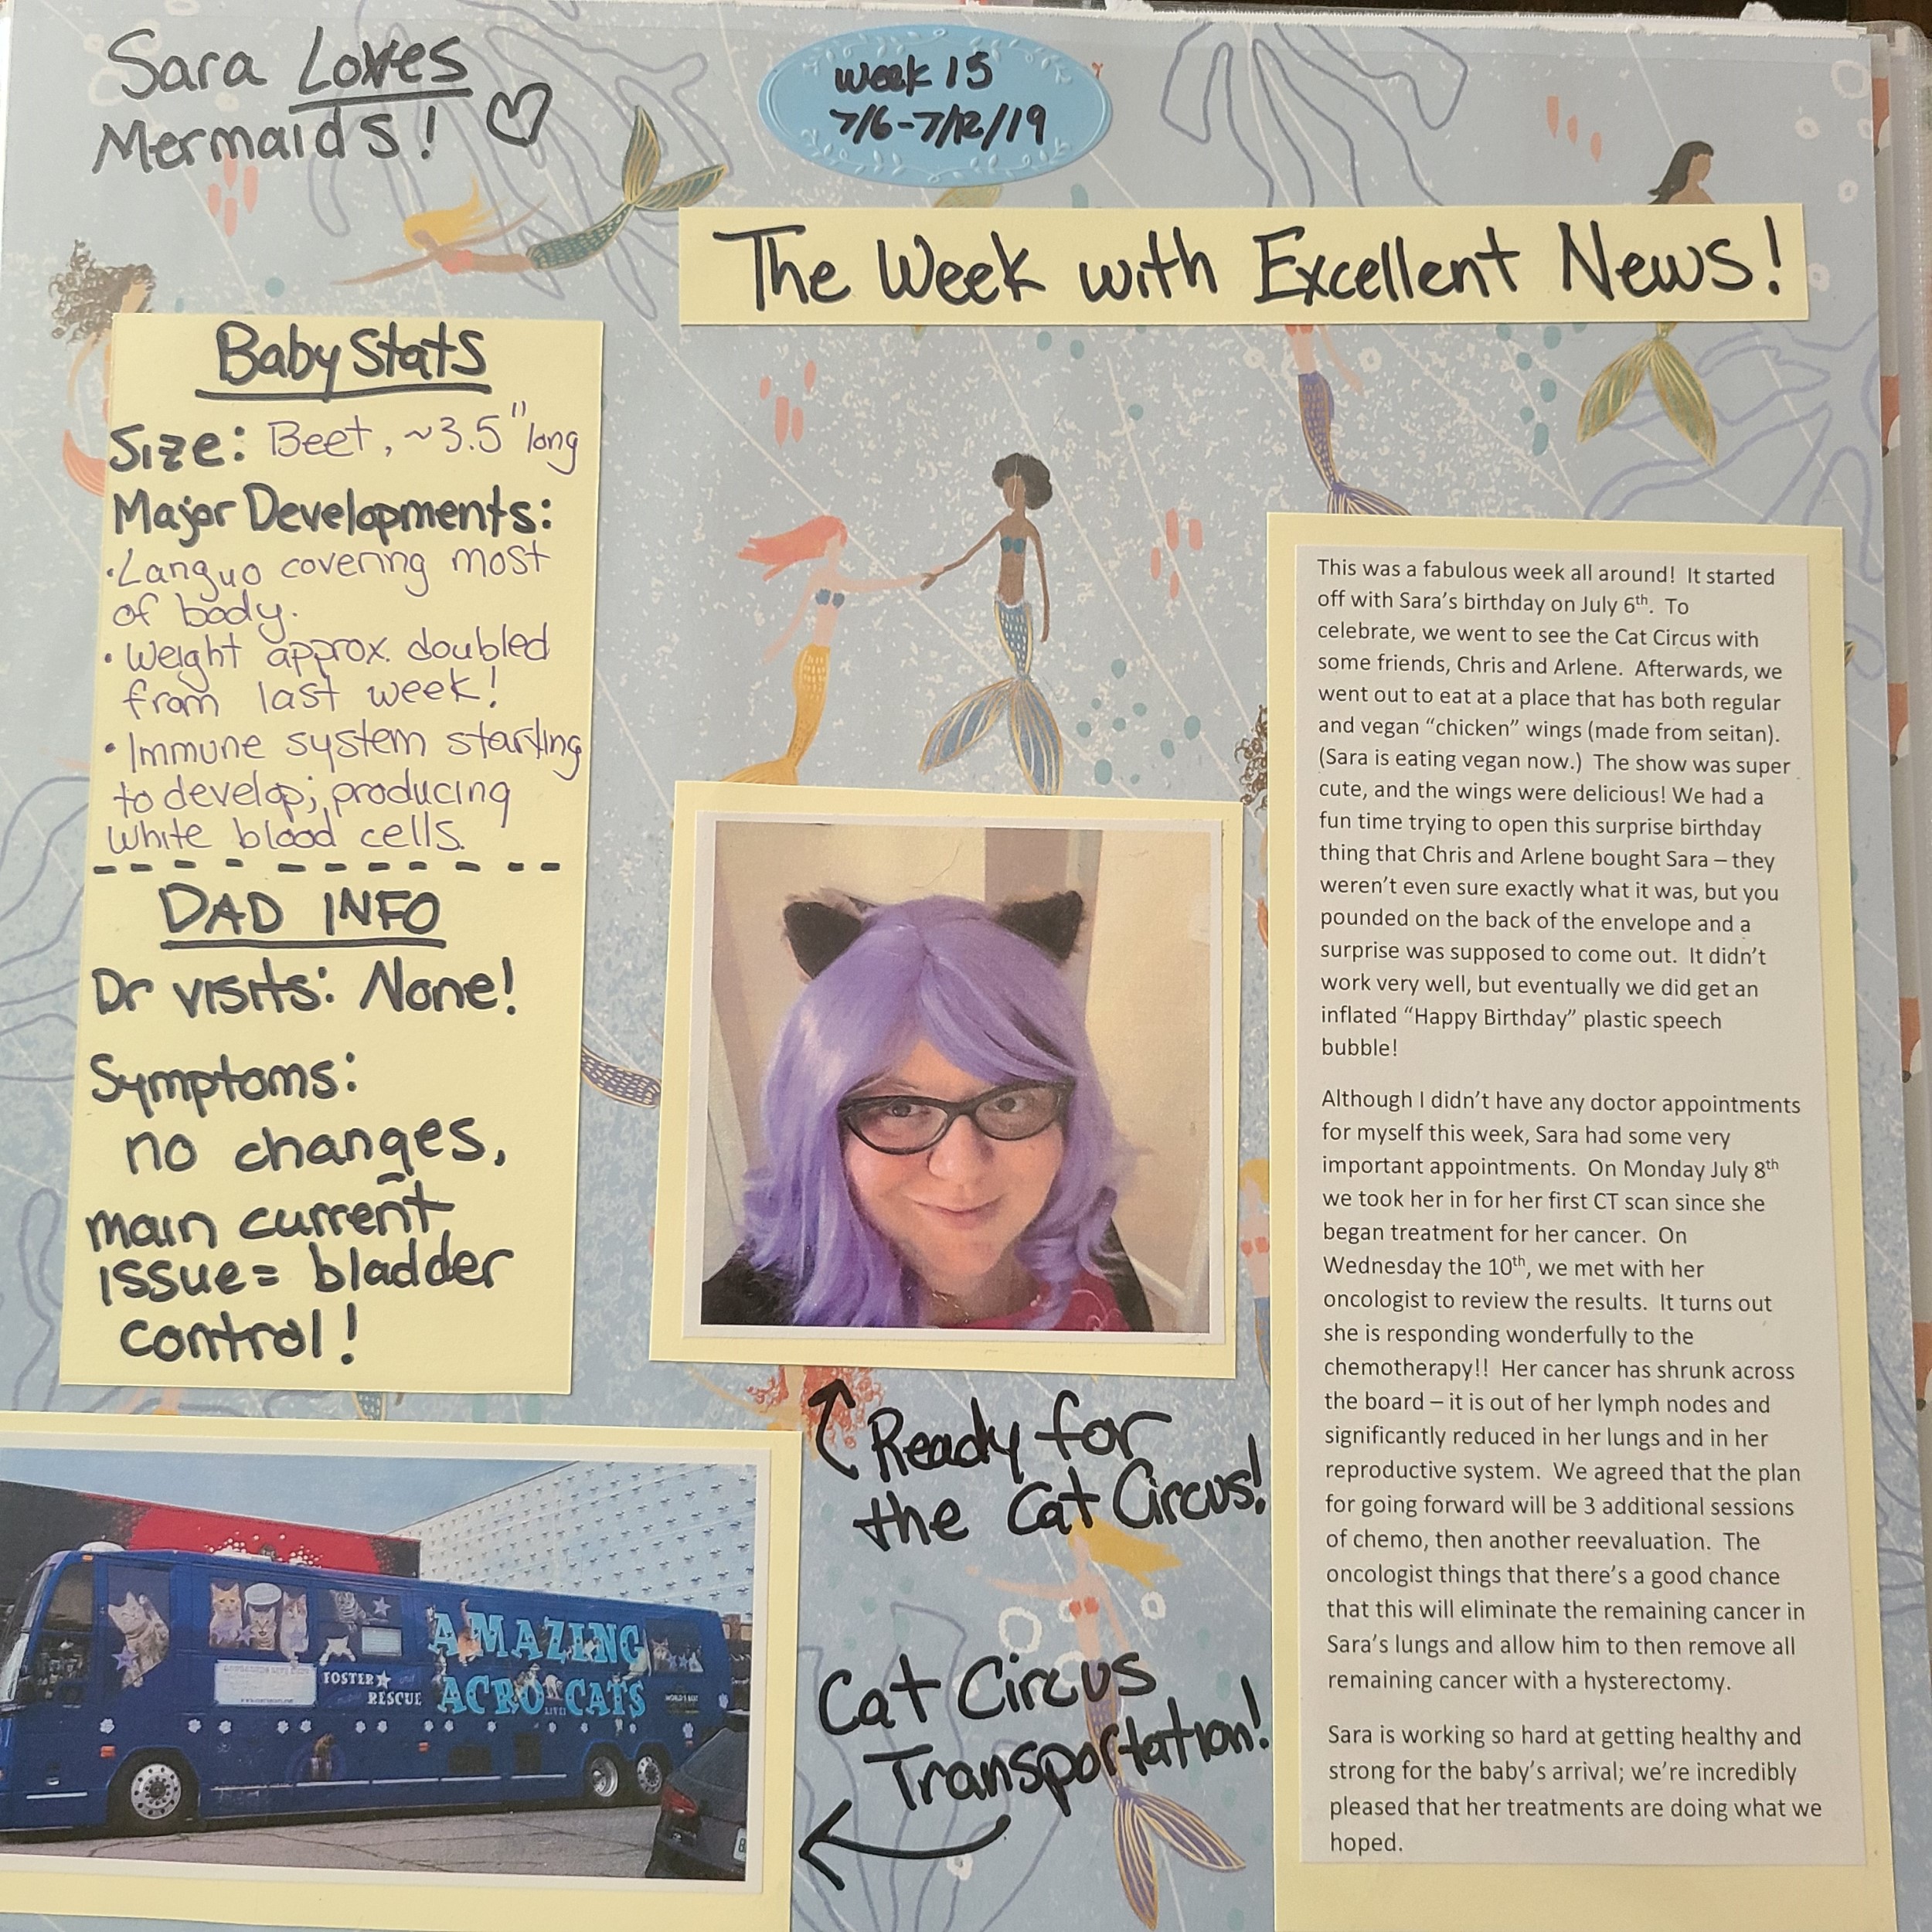 Week 15 scrapbook page, light blue ocean background with various mermaids of different haircolors, skintones, and tail colors, and some light outlines of coral and bubbles. There is a central image of Sara smiling in black framed glasses, a lavender wig and cat ears captioned "Ready for the cat circus!" and there is a second picture of a large blue bus with a wrap showing various cute cats, and the words "Foster (Star image) Rescue" and "Amazing Acro-Cats", with the caption "Cat Circus Transportation".  In the top left corner of the background is written "Sara LOVES Mermaids!"